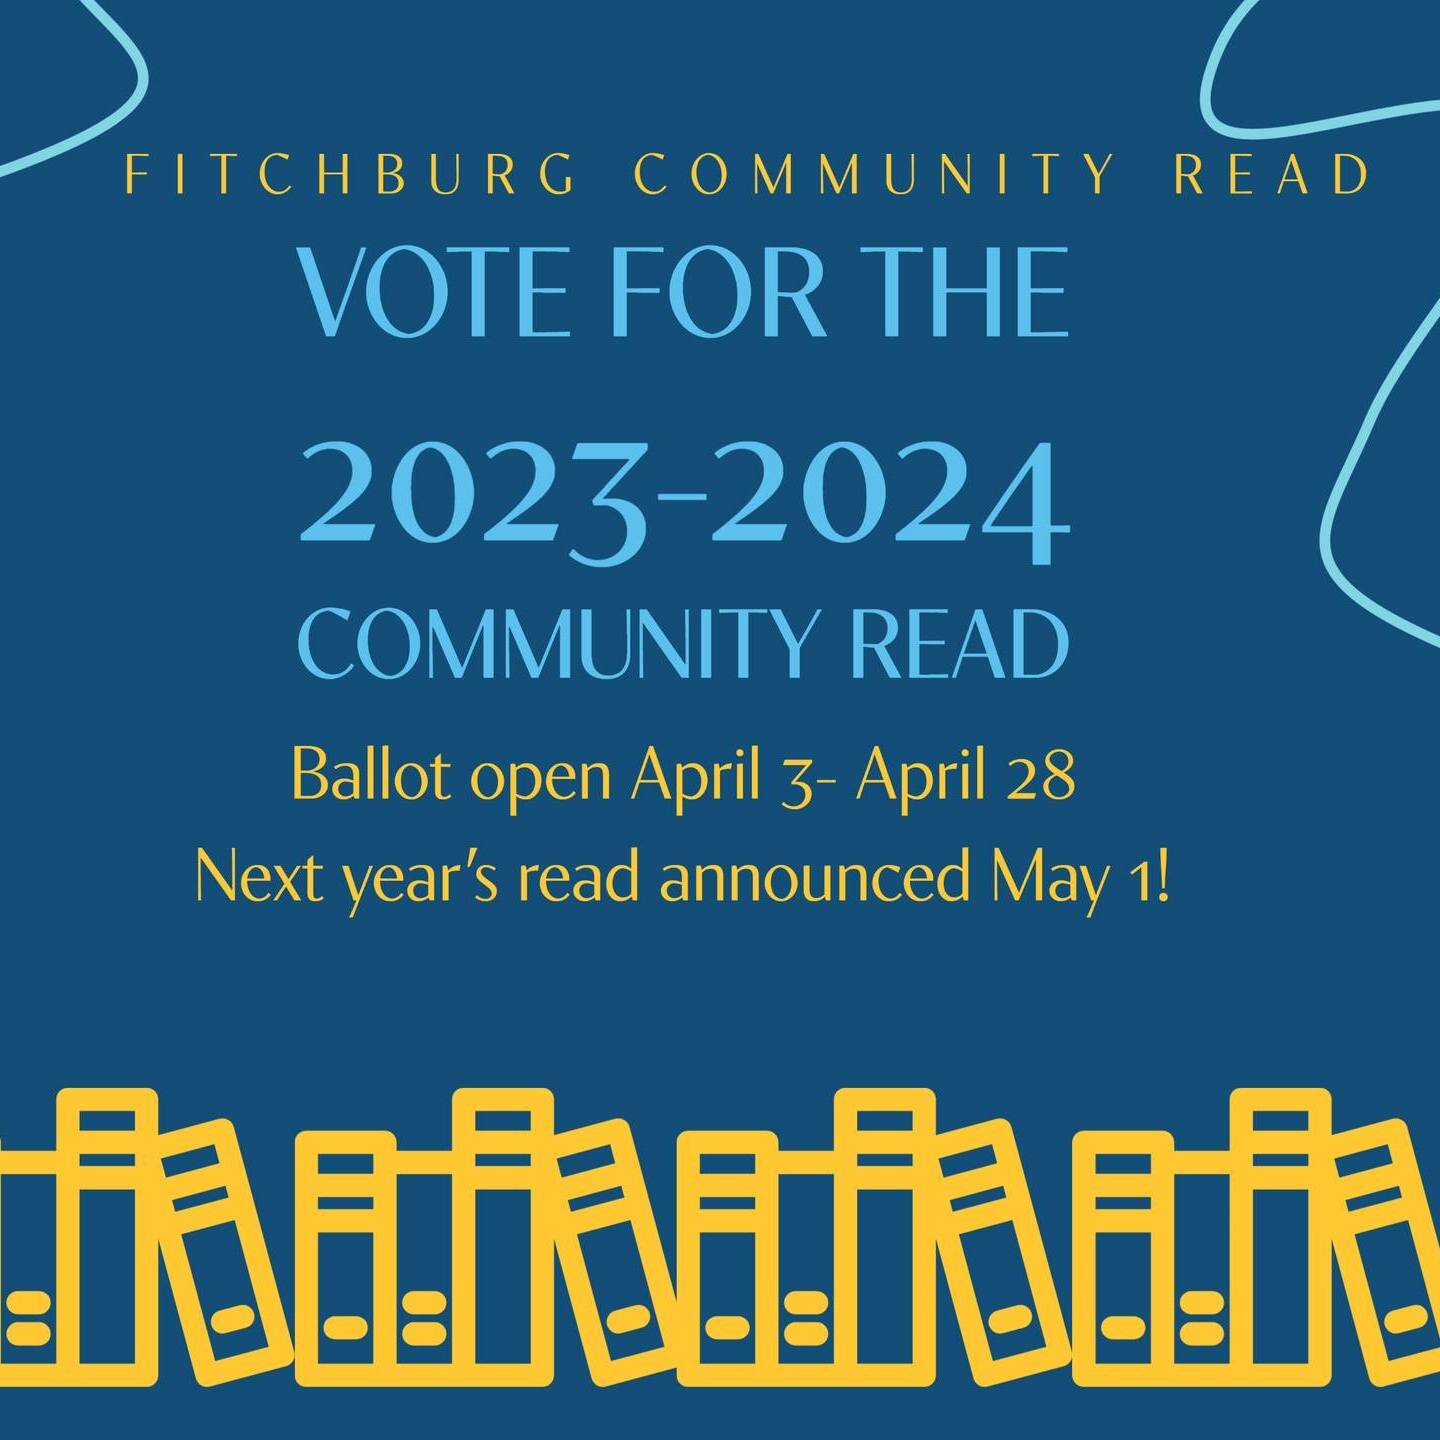 VOTE FOR NEXT YEAR'S COMMUNITY READ! 

We have officially opened voting for next year's Community Read book, and we invite all of you to take part in that process. Voting will be open April 3-April 28. Next year's read will be announced on our social